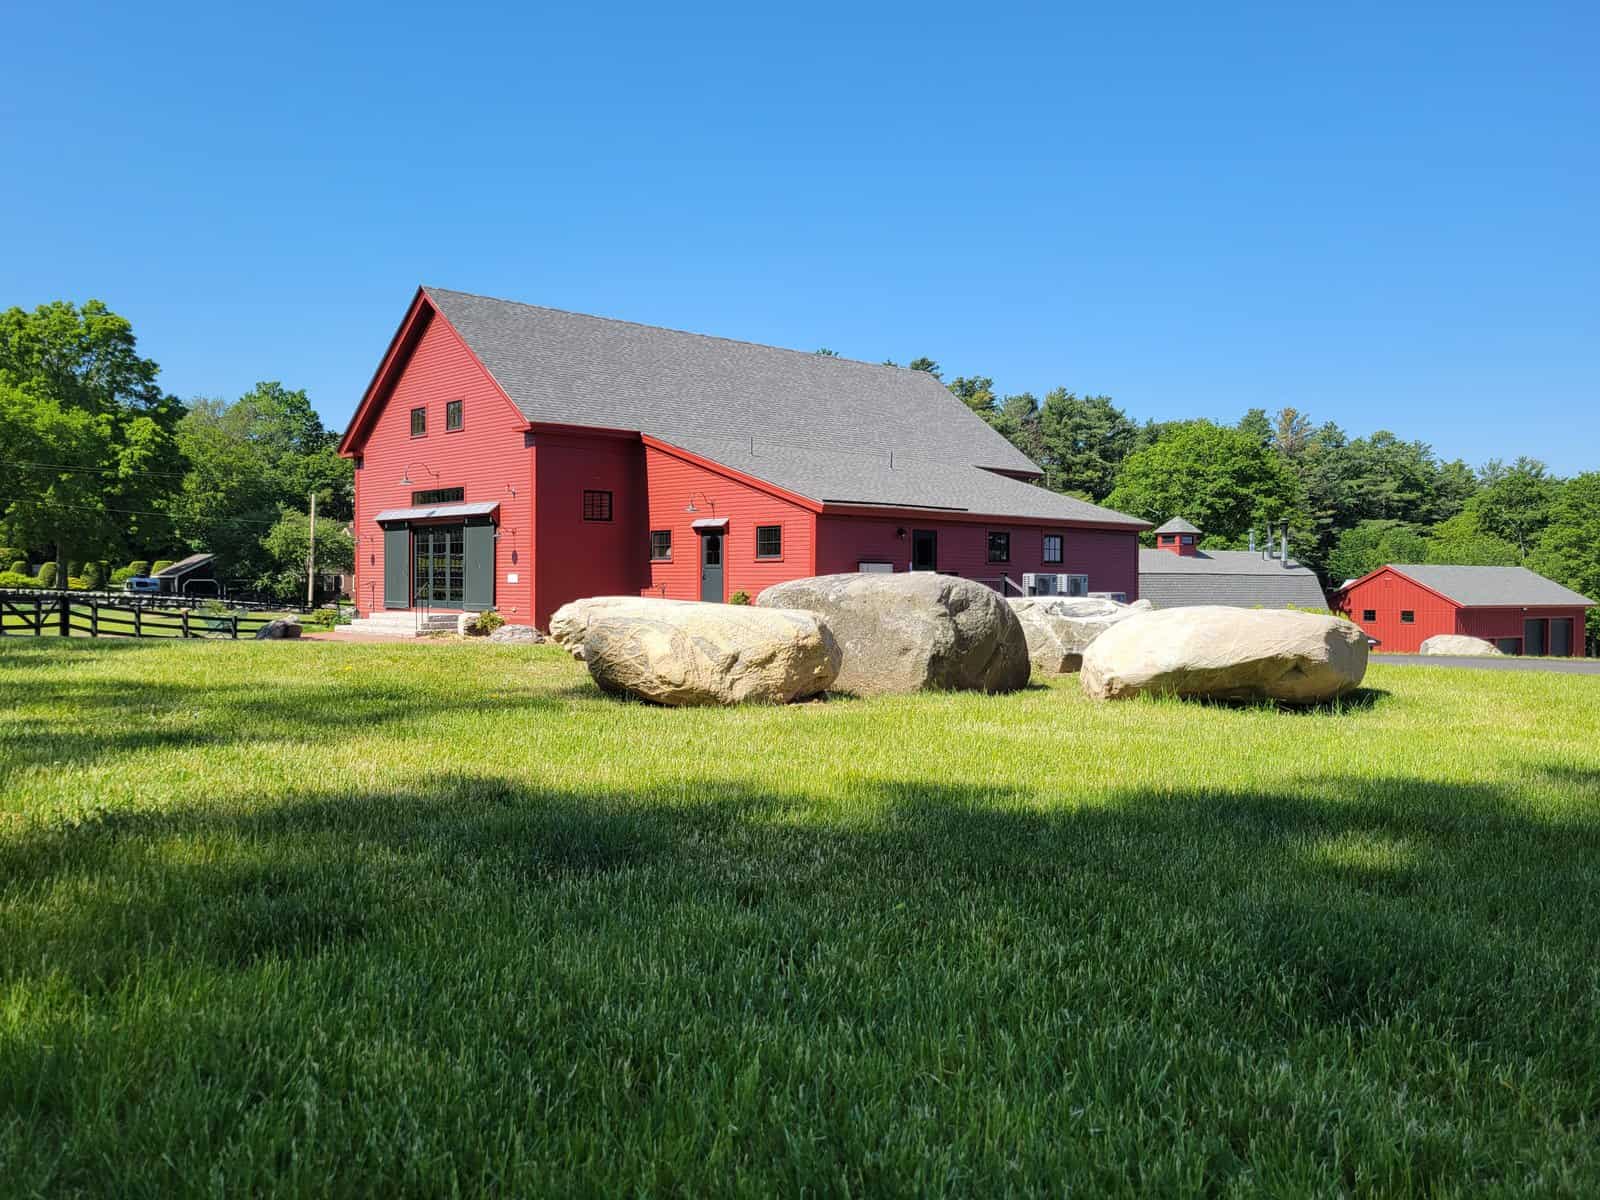 The project entailed: 1) partially restoring and renovating two barns that originated in 1793 and 1806;  2) converting an old bull barn into a maple sugaring barn; 3) constructing a new barn to house machinery; and 4) offsetting electricity with a field of solar panels, making the property net-zero.